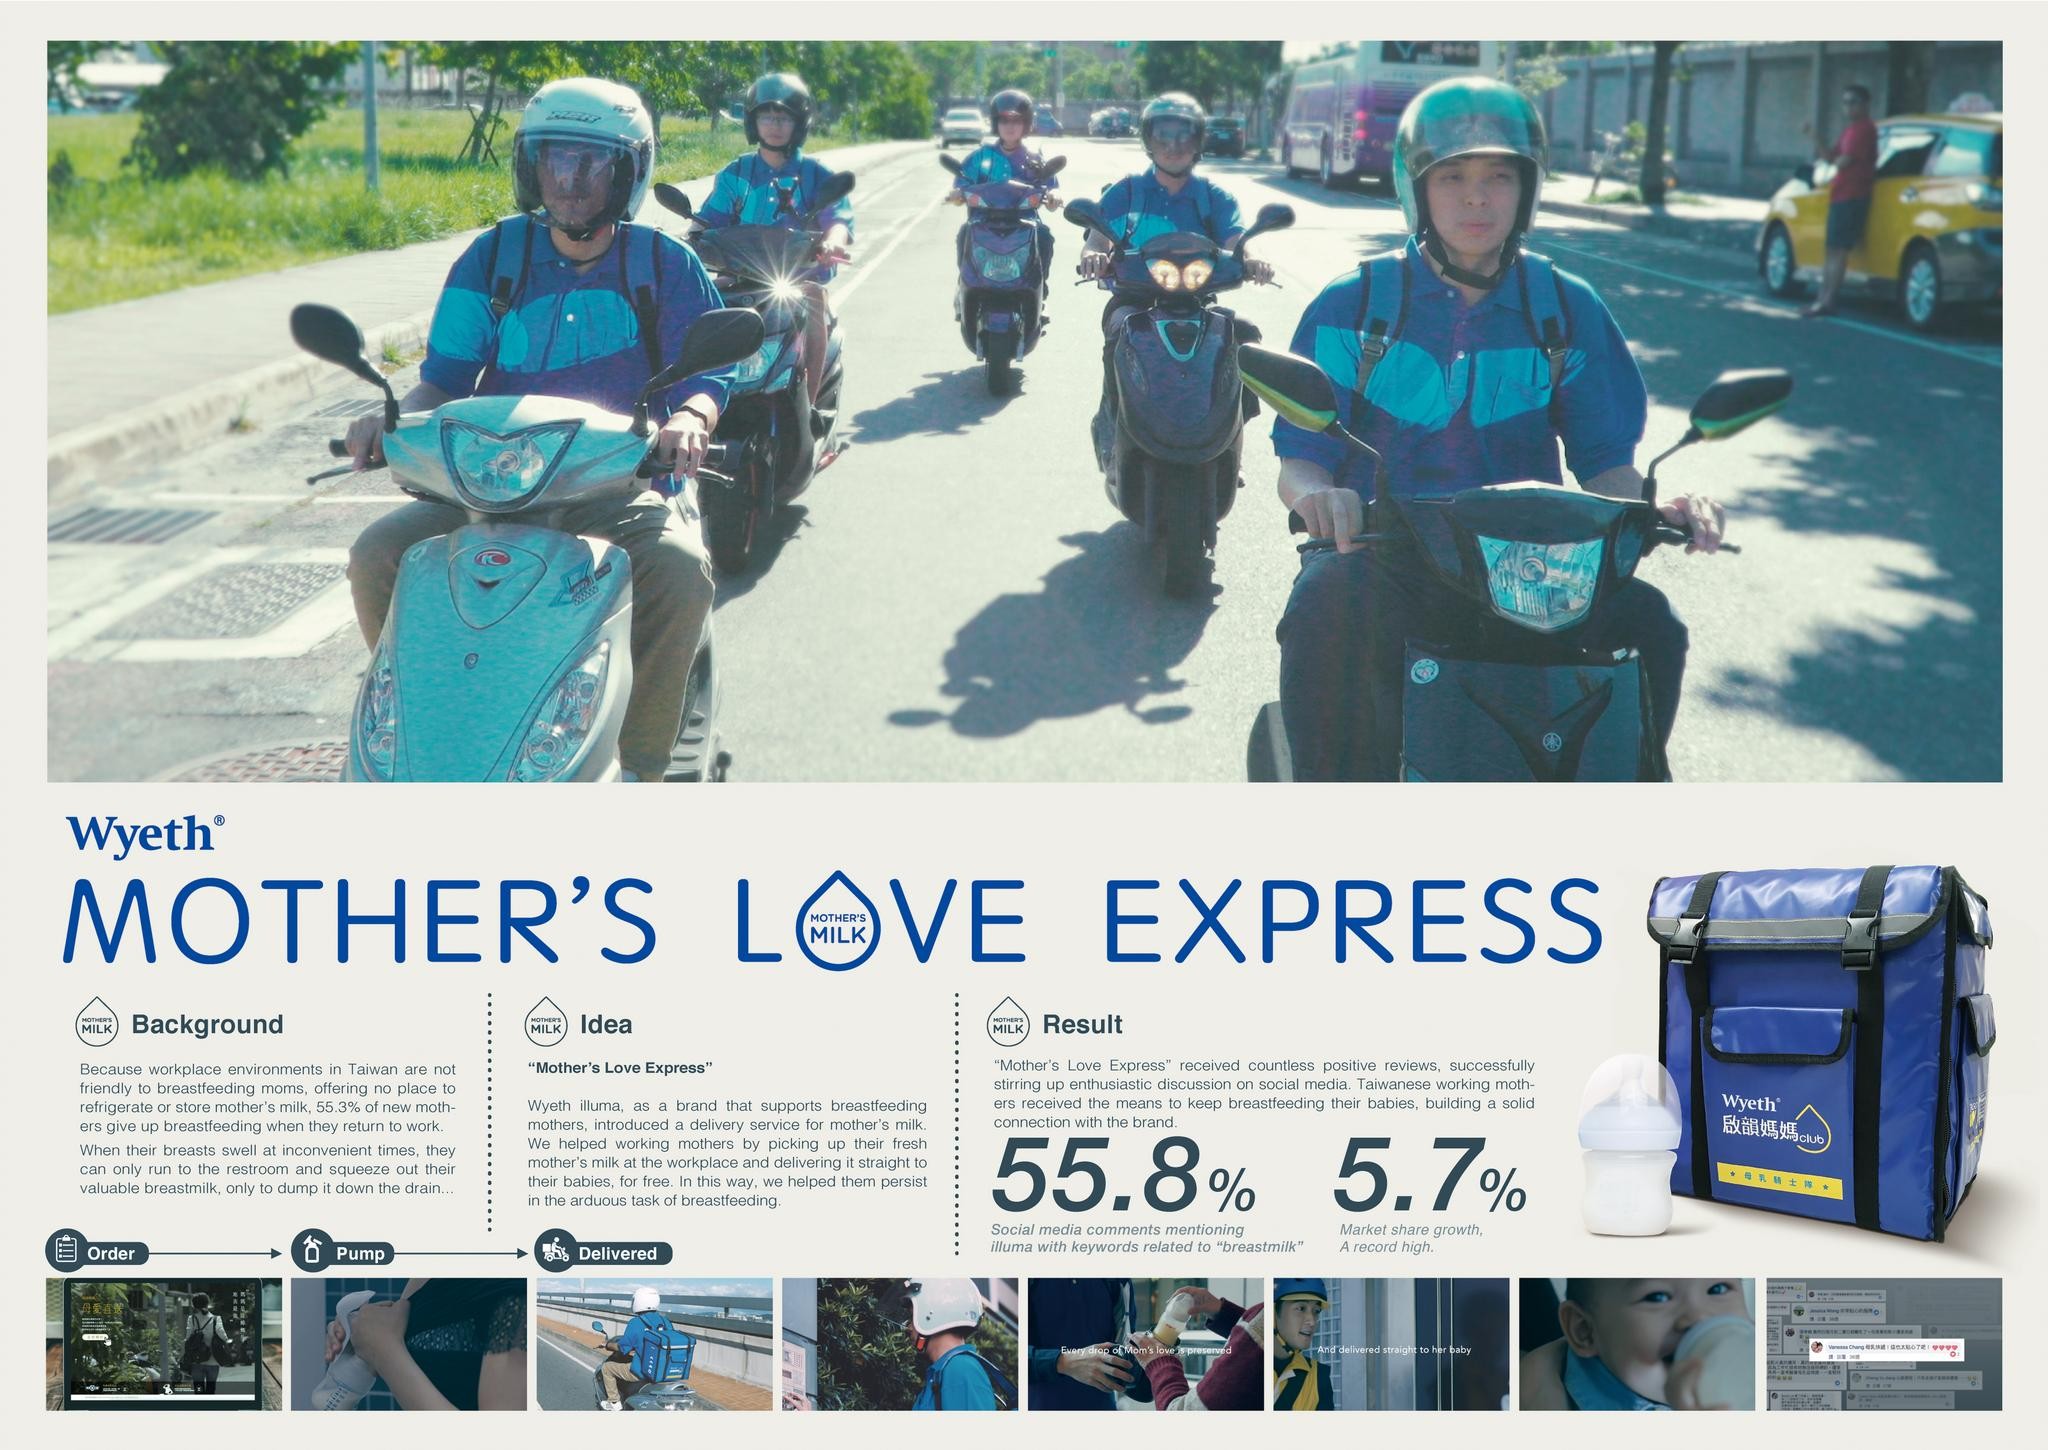 MOTHER'S LOVE EXPRESS